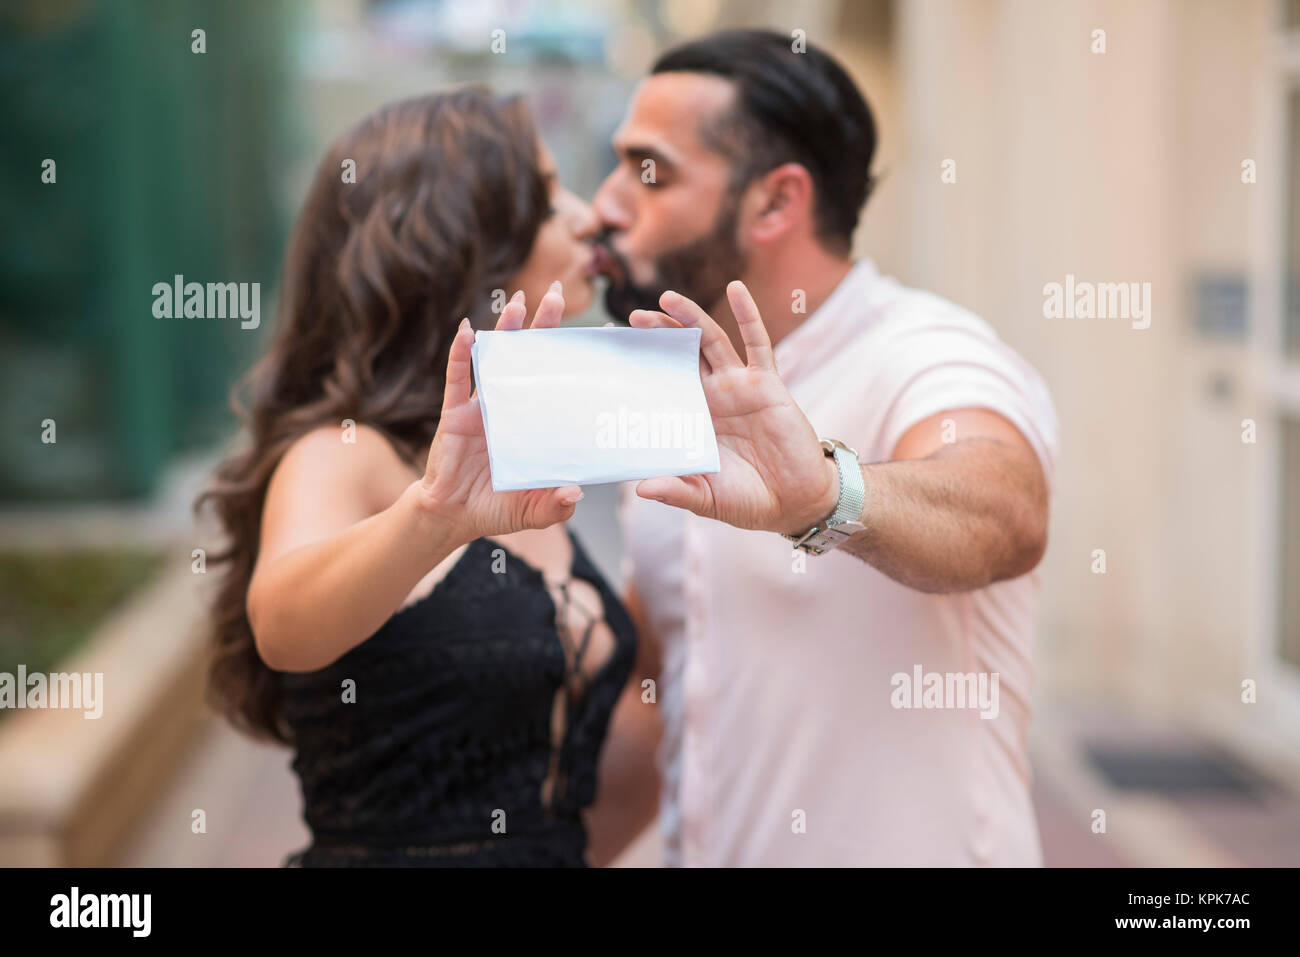 Man and woman kissing while holding a blank card Stock Photo